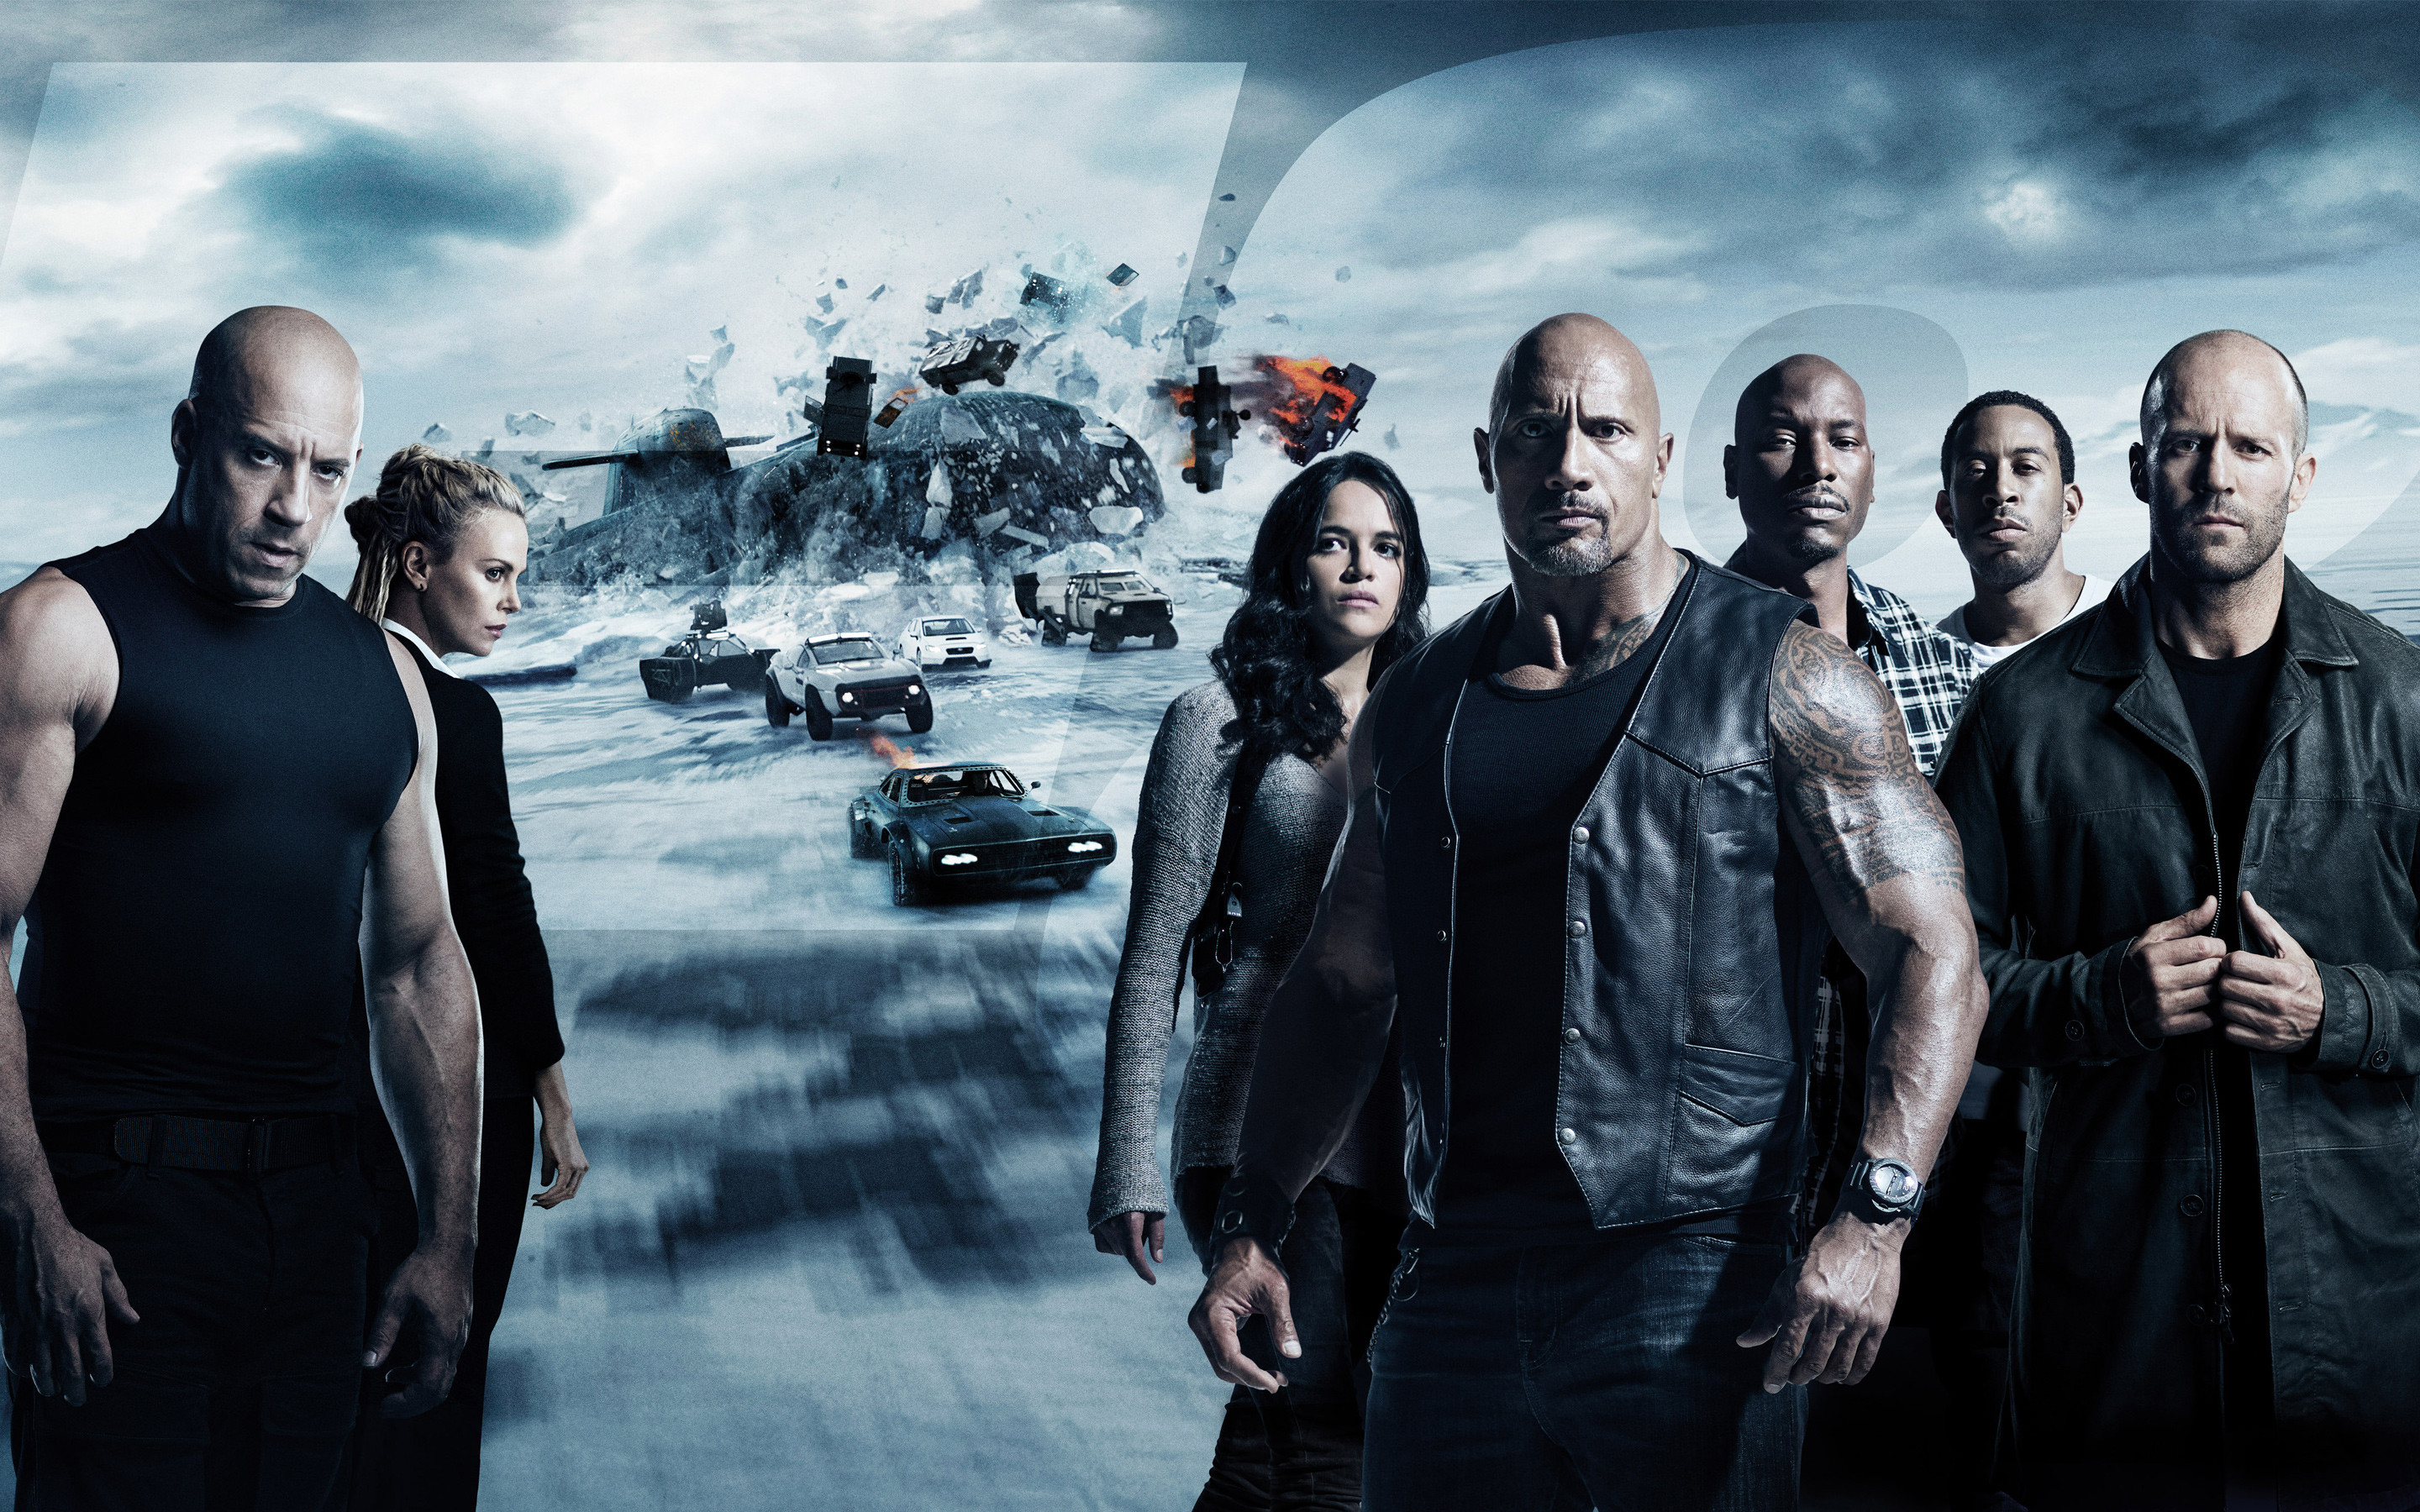 2880x1800 The Fate of the Furious wallpaper hd | The Fate of the Furious wallpapers  hd | Pinterest | Wallpaper